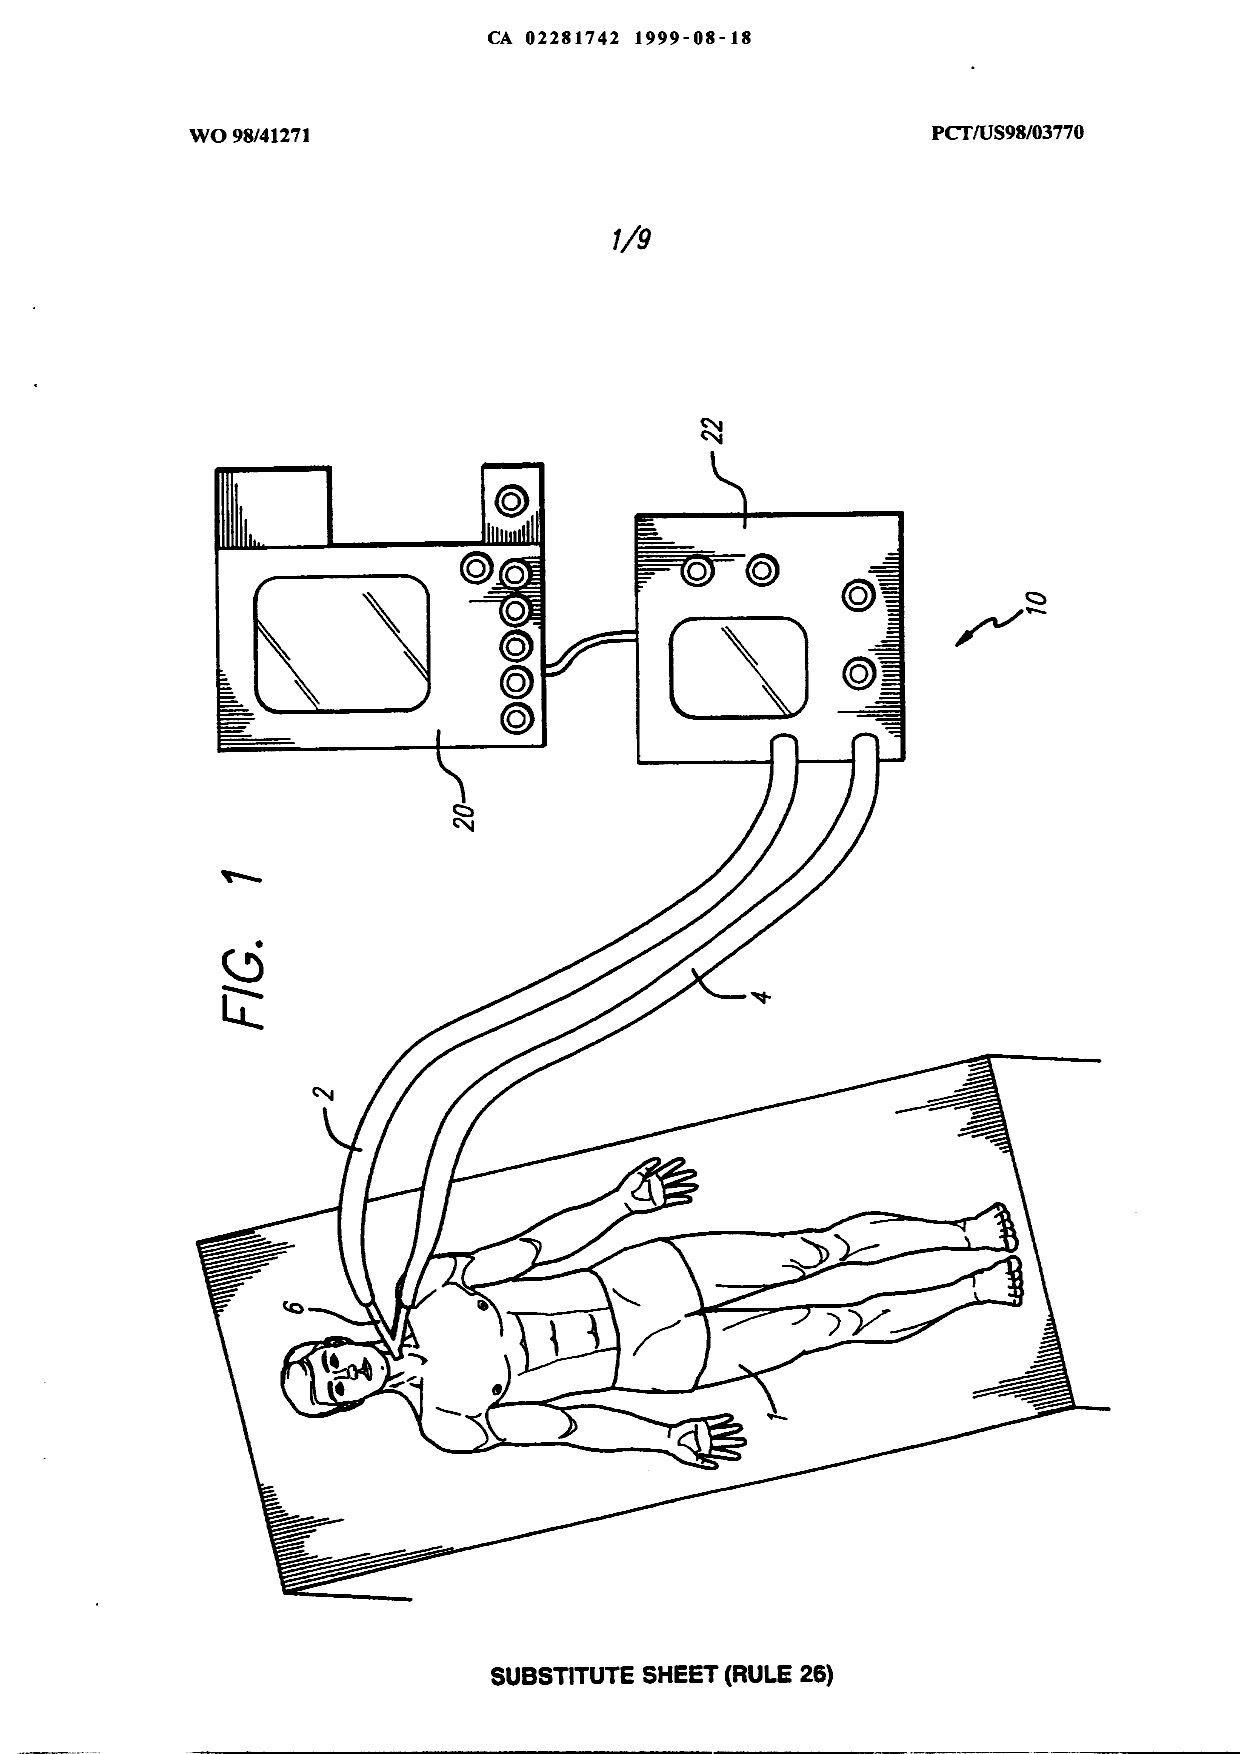 Canadian Patent Document 2281742. Drawings 20071105. Image 1 of 9